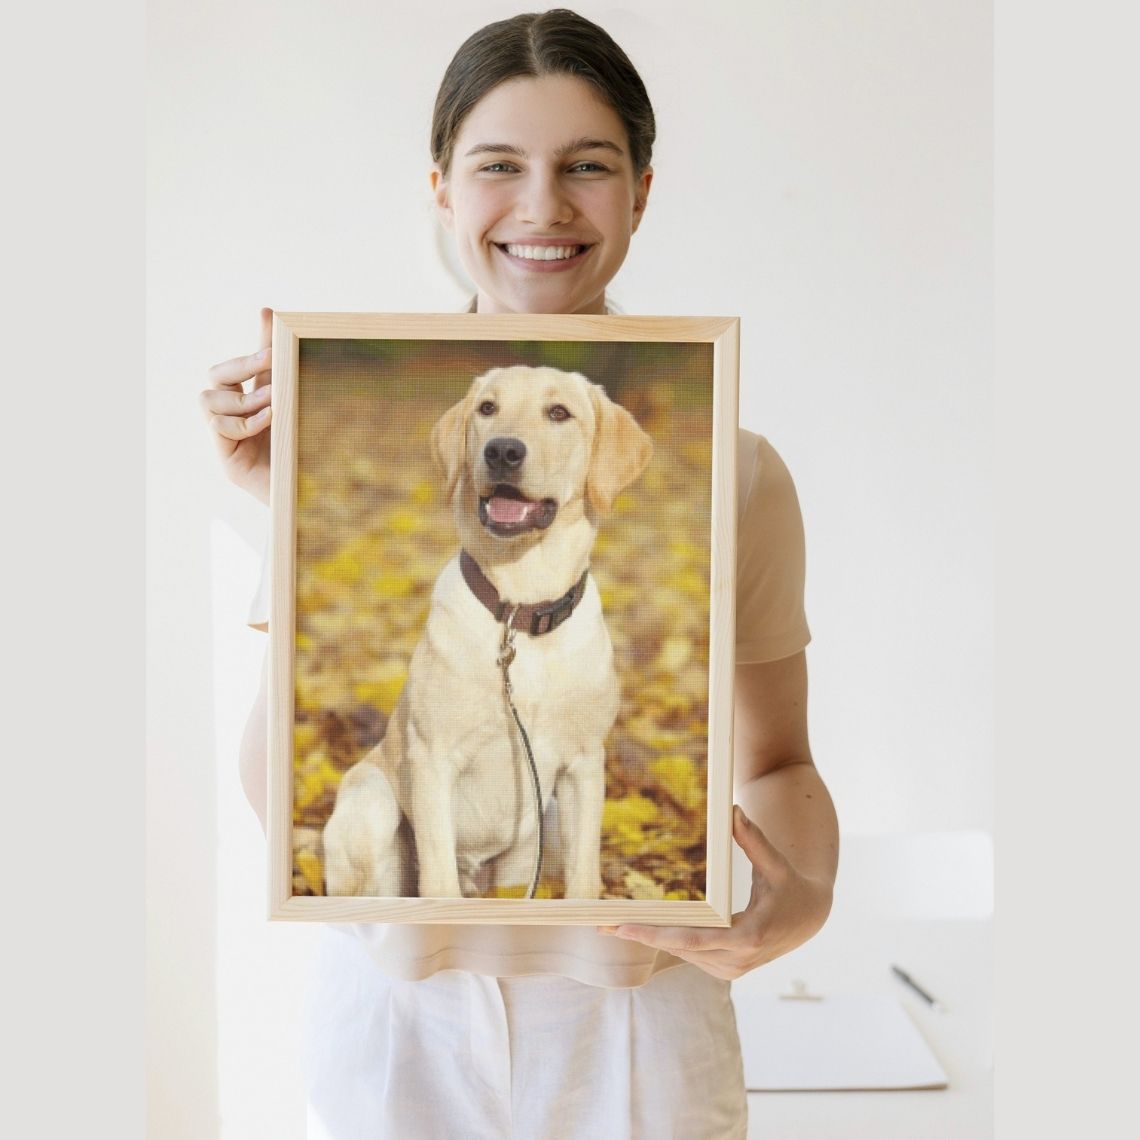 Custom Diamond Painting - Personalized Kit With Your Photo or Art